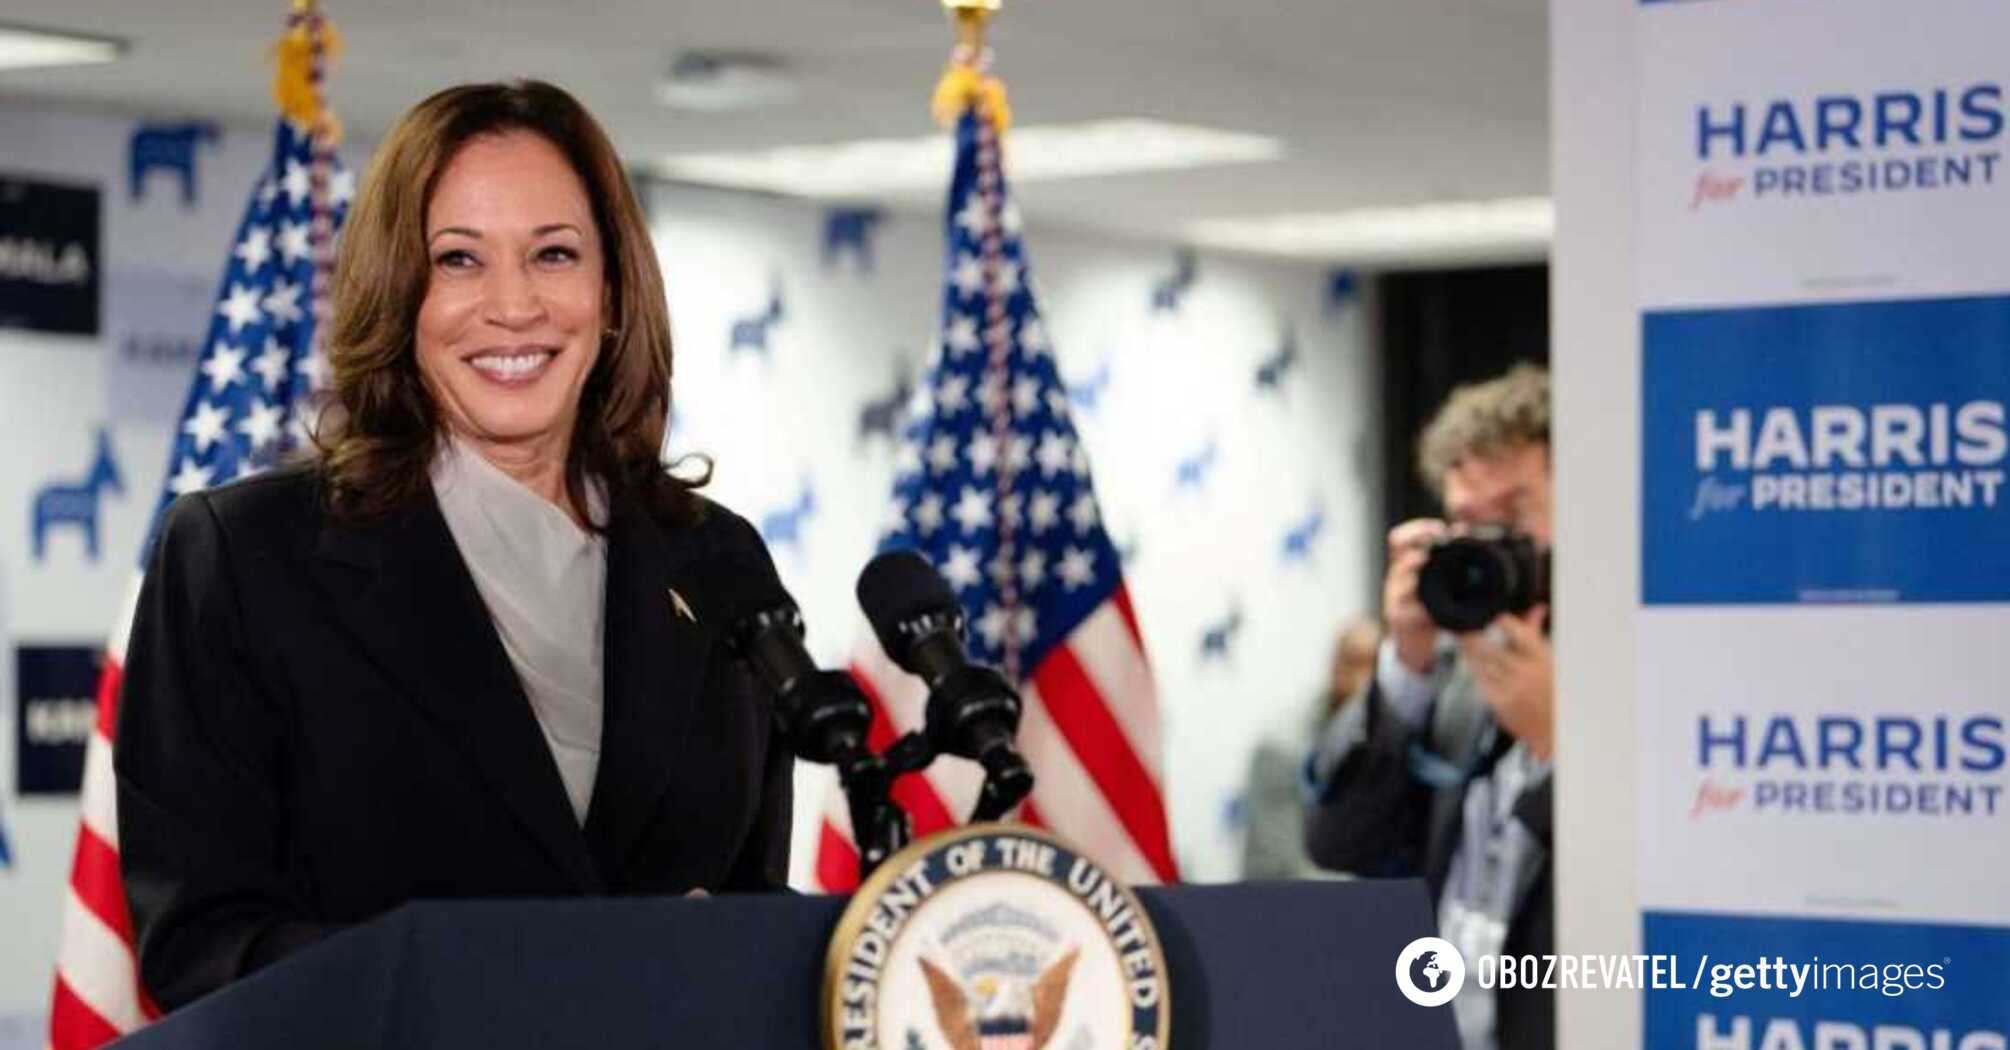 Kamala Harris raised $100 million for her campaign in the first day: what we know about donors